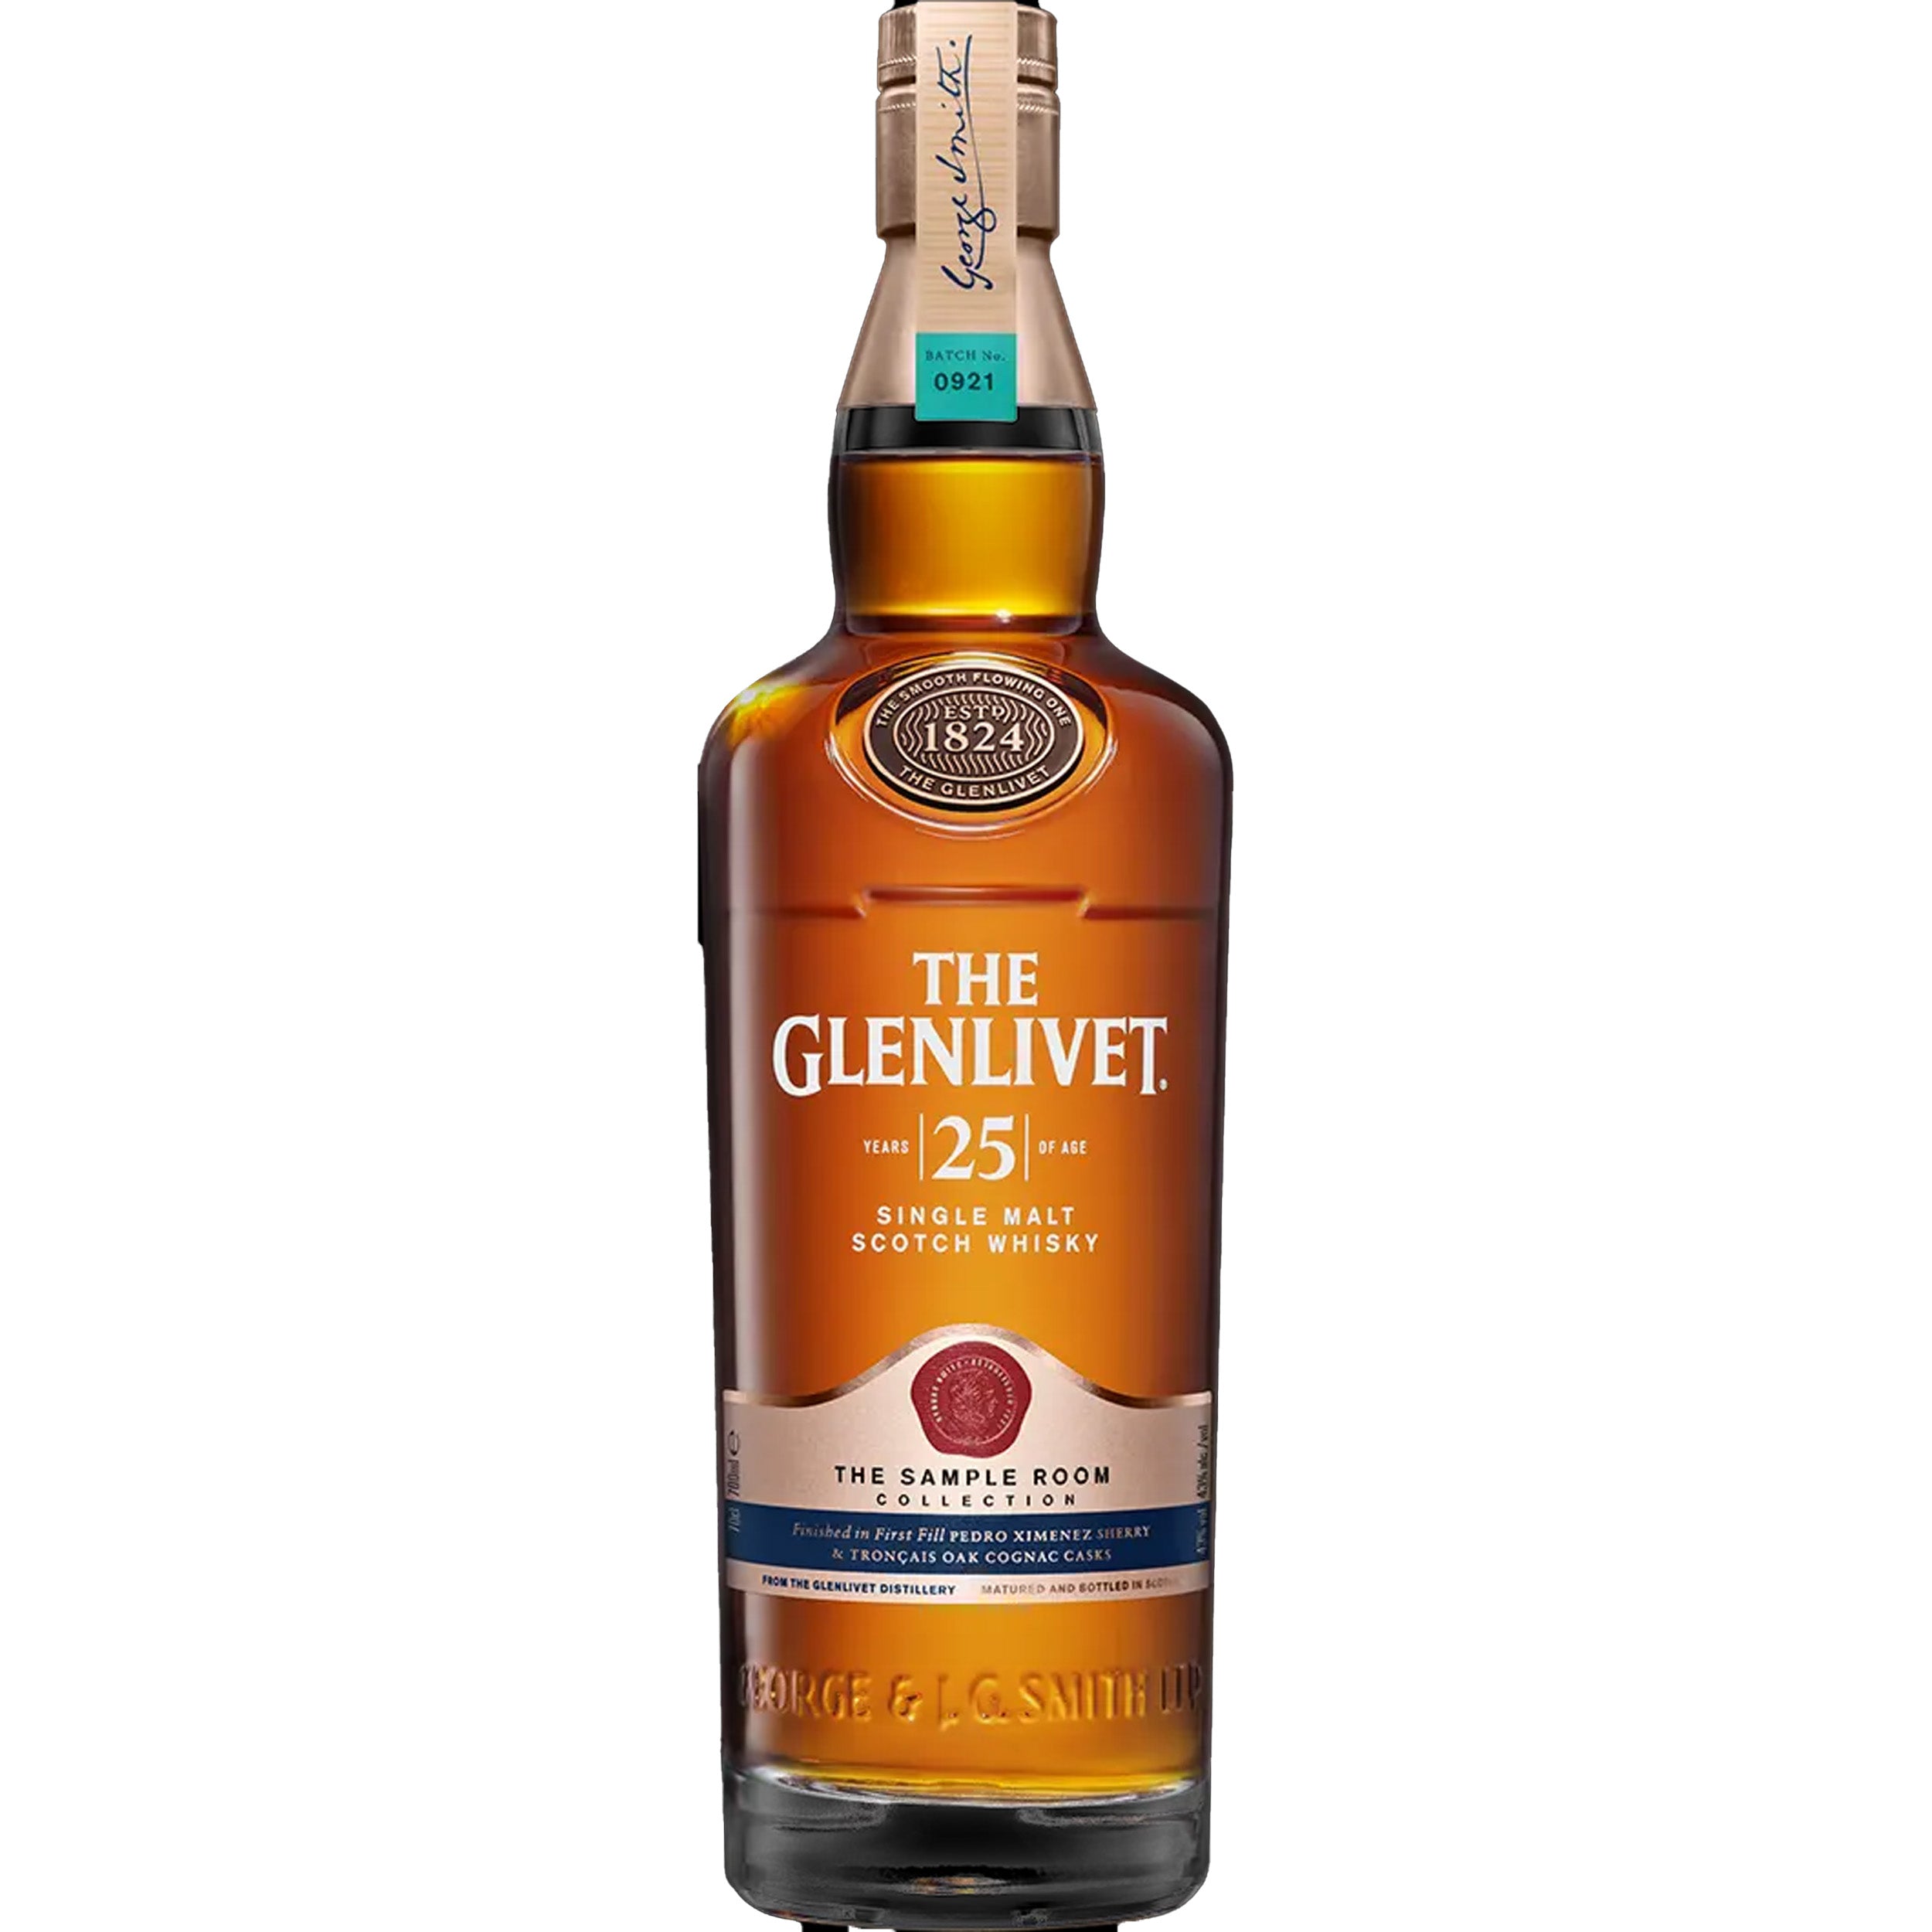 The Glenlivet 25 Year The Sample Room Scotch Whisky